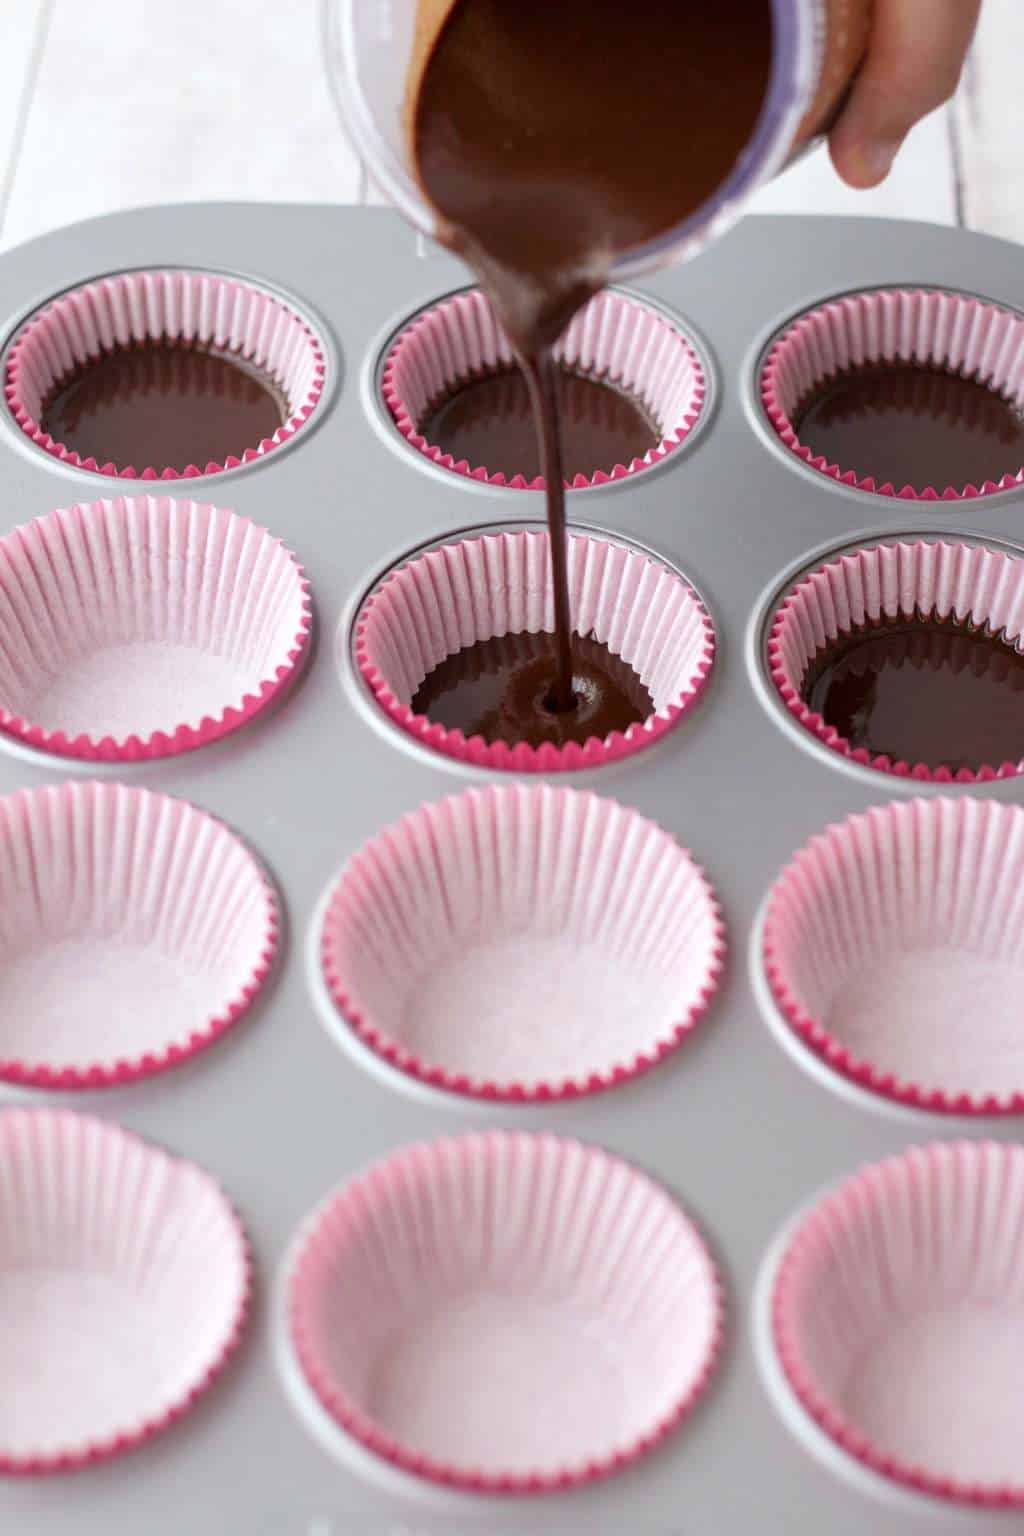 Raw chocolate pouring out into cupcake liners. 